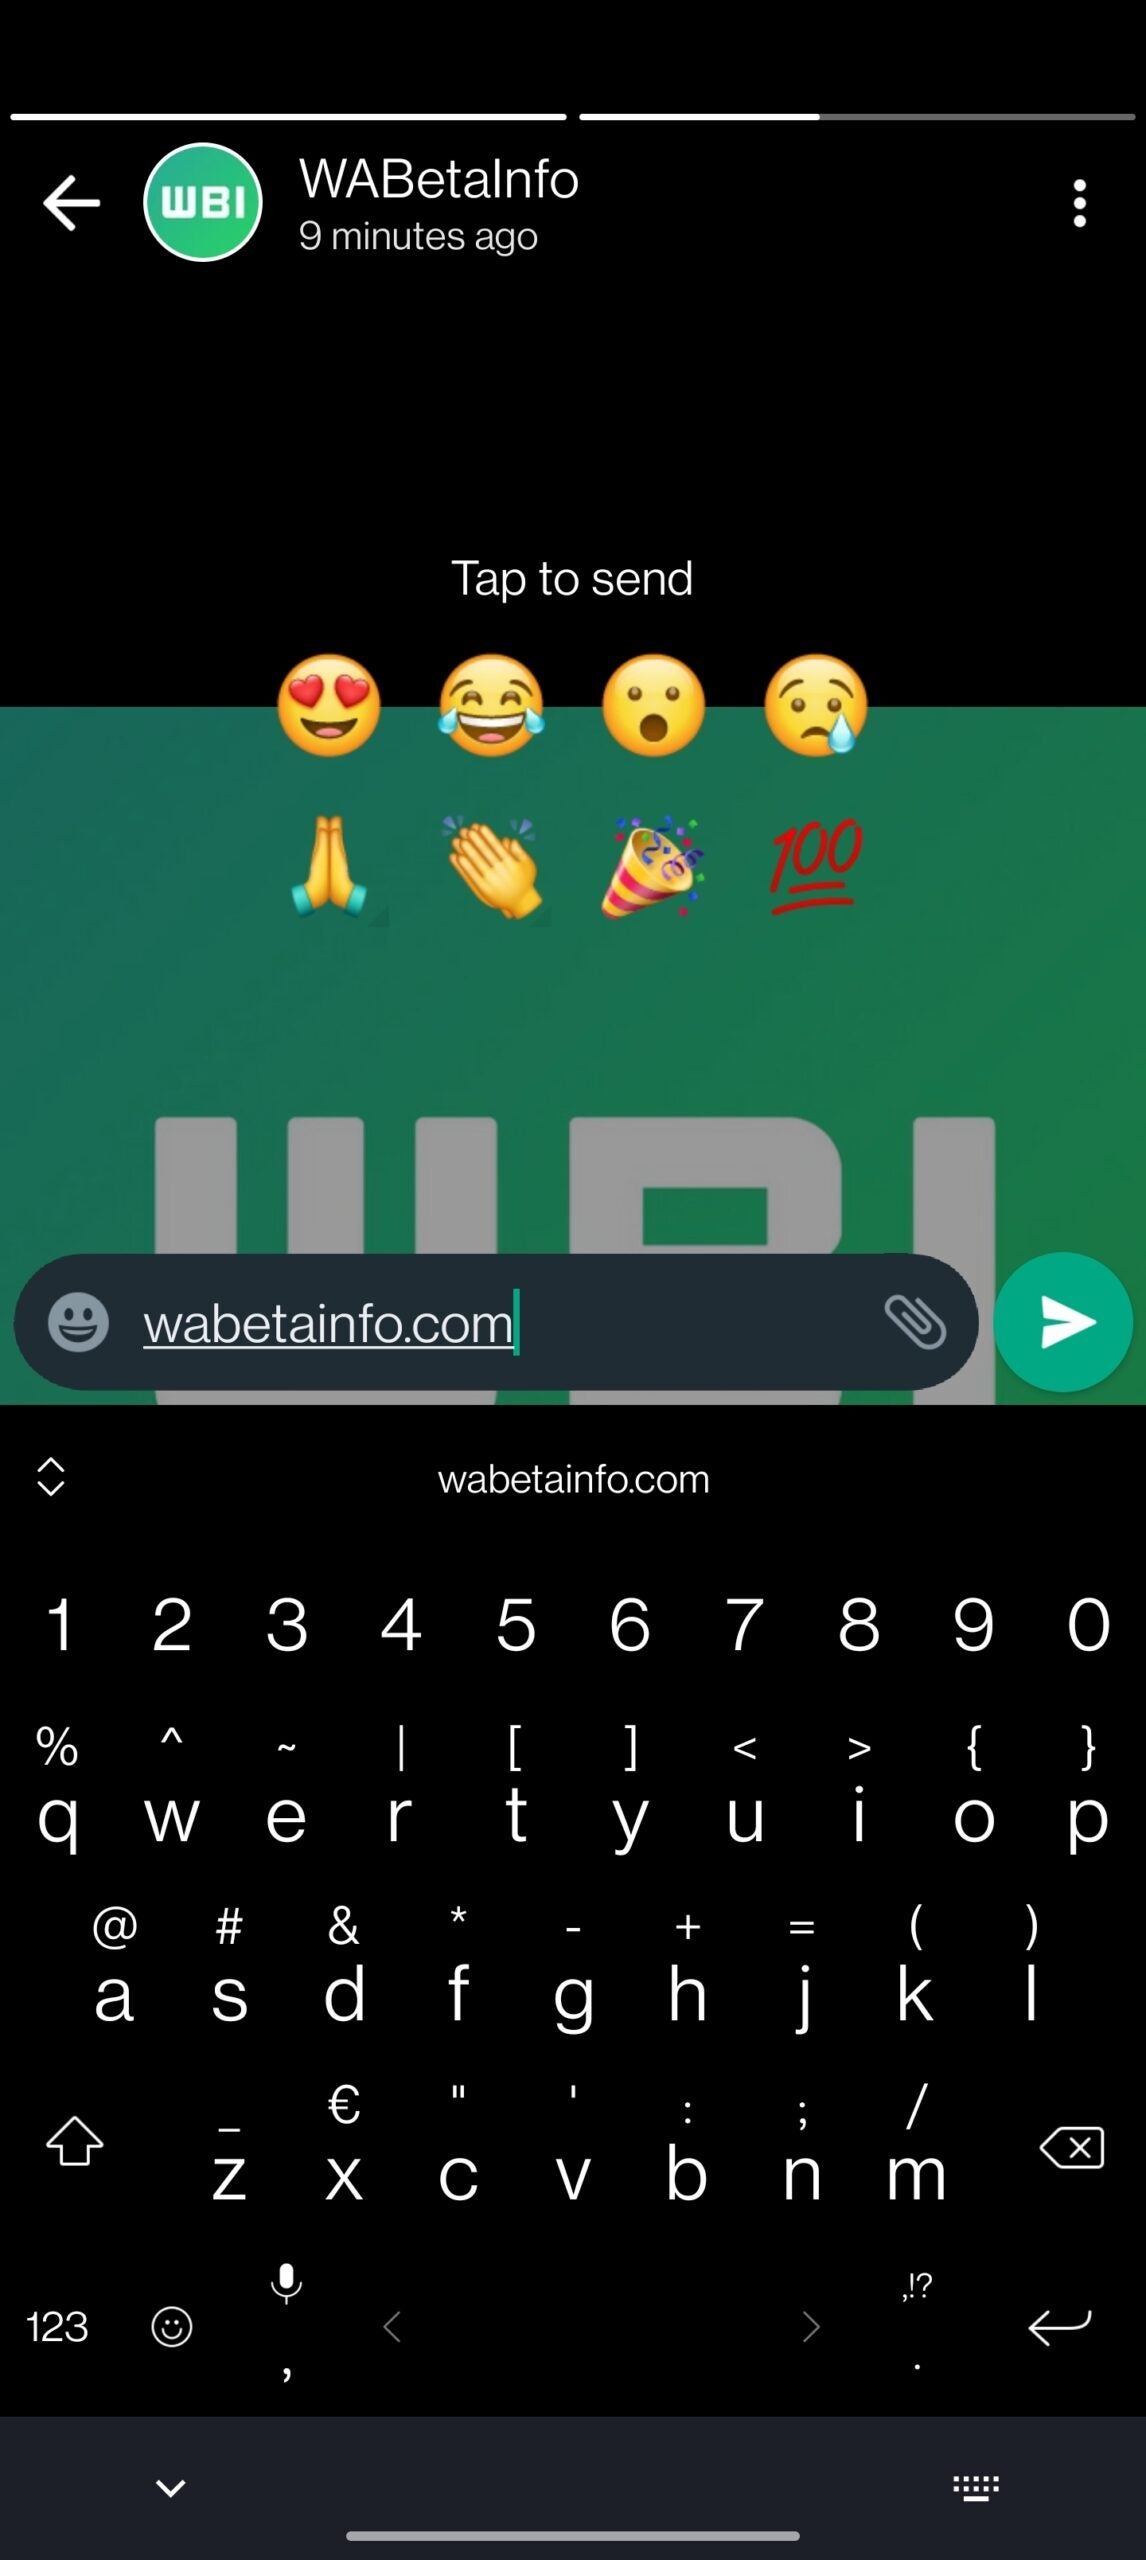 WhatsApp working on another feature for Status Updates: quick Insta-like emoji reactions